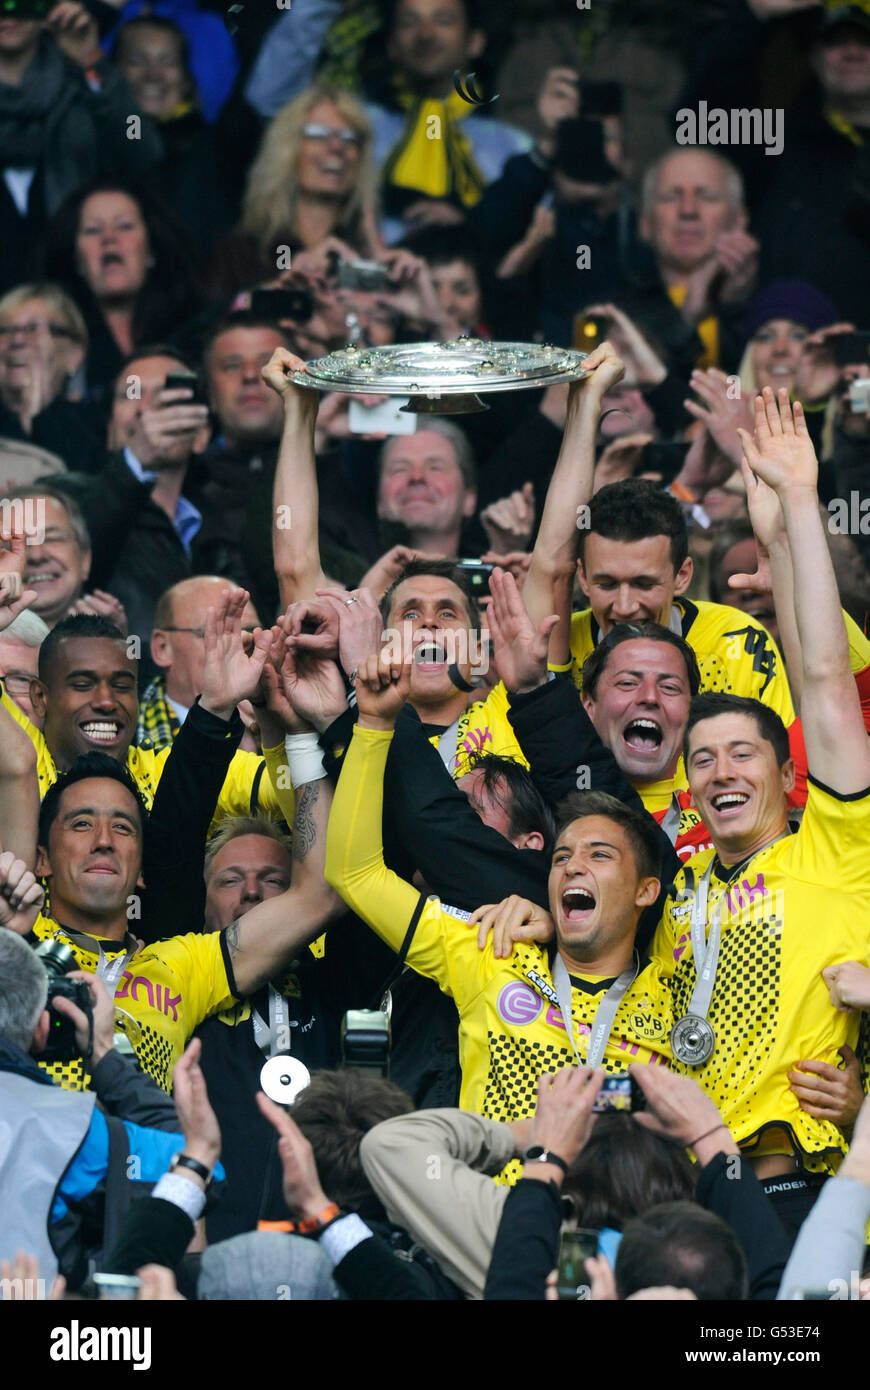 Cheering footballers of BVB Borussia Dortmund with the league cup trophy, after match Borussia Dortmund vs SC Freiburg (4:0) Stock Photo